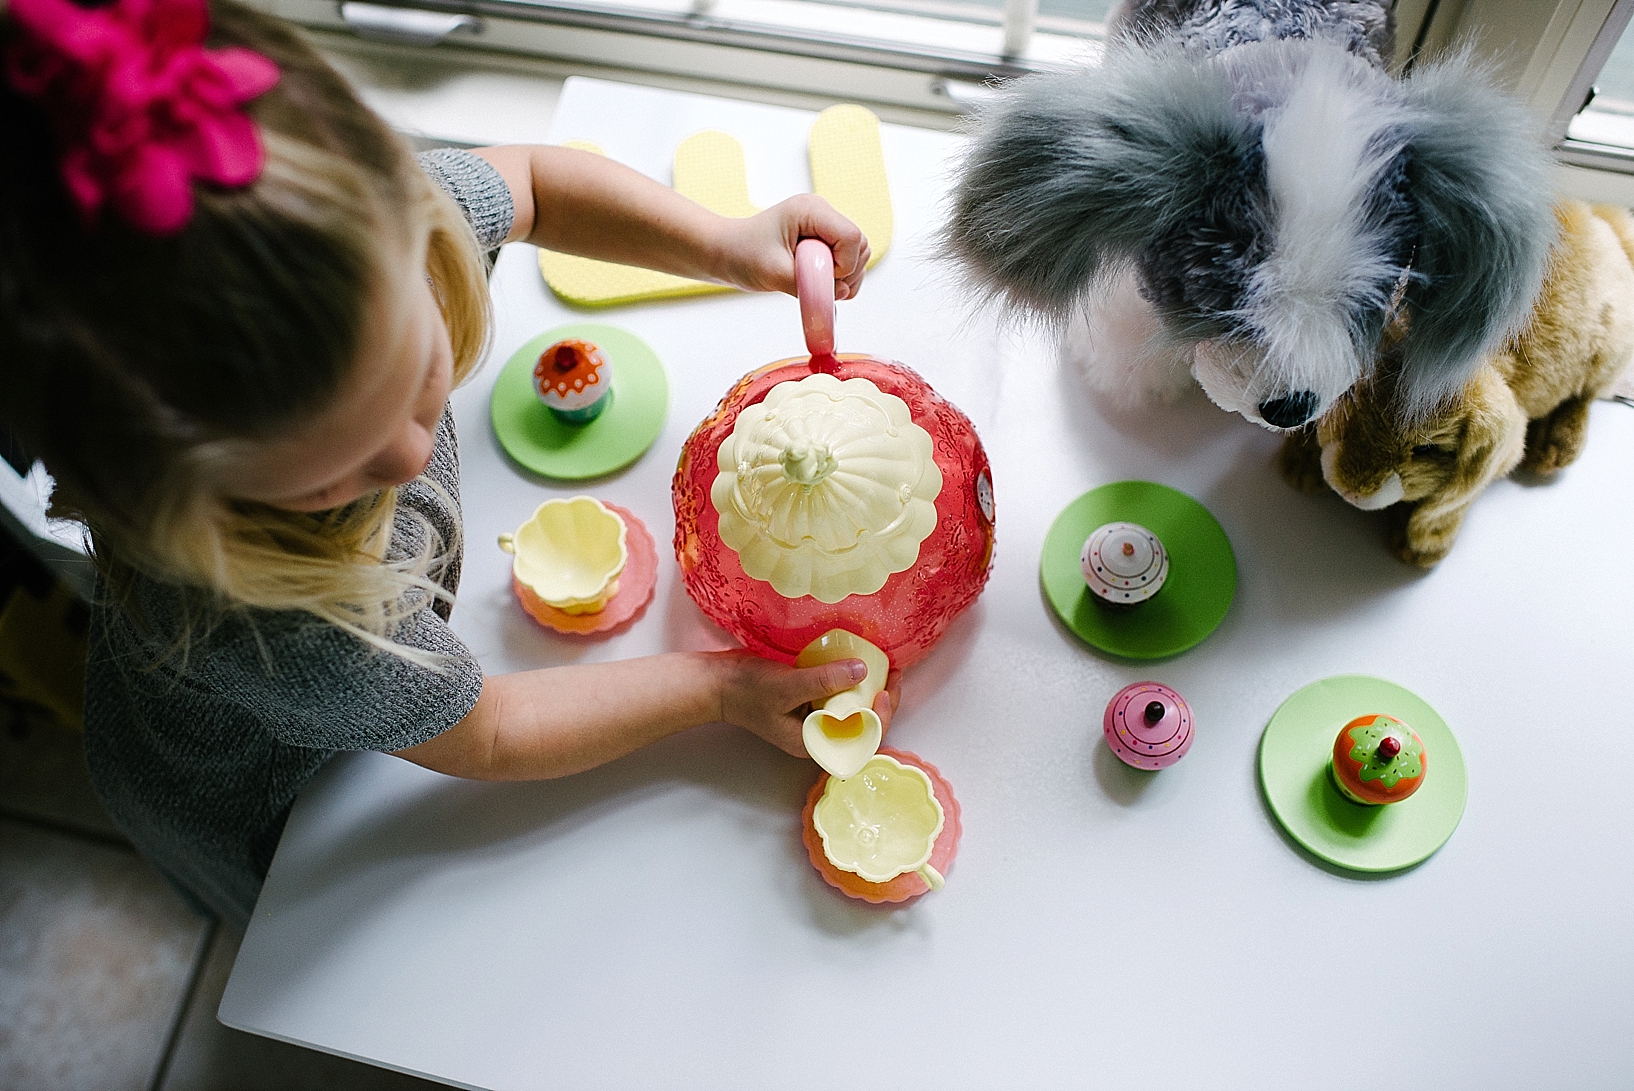 young blonde girl having tea party with stuffed animals